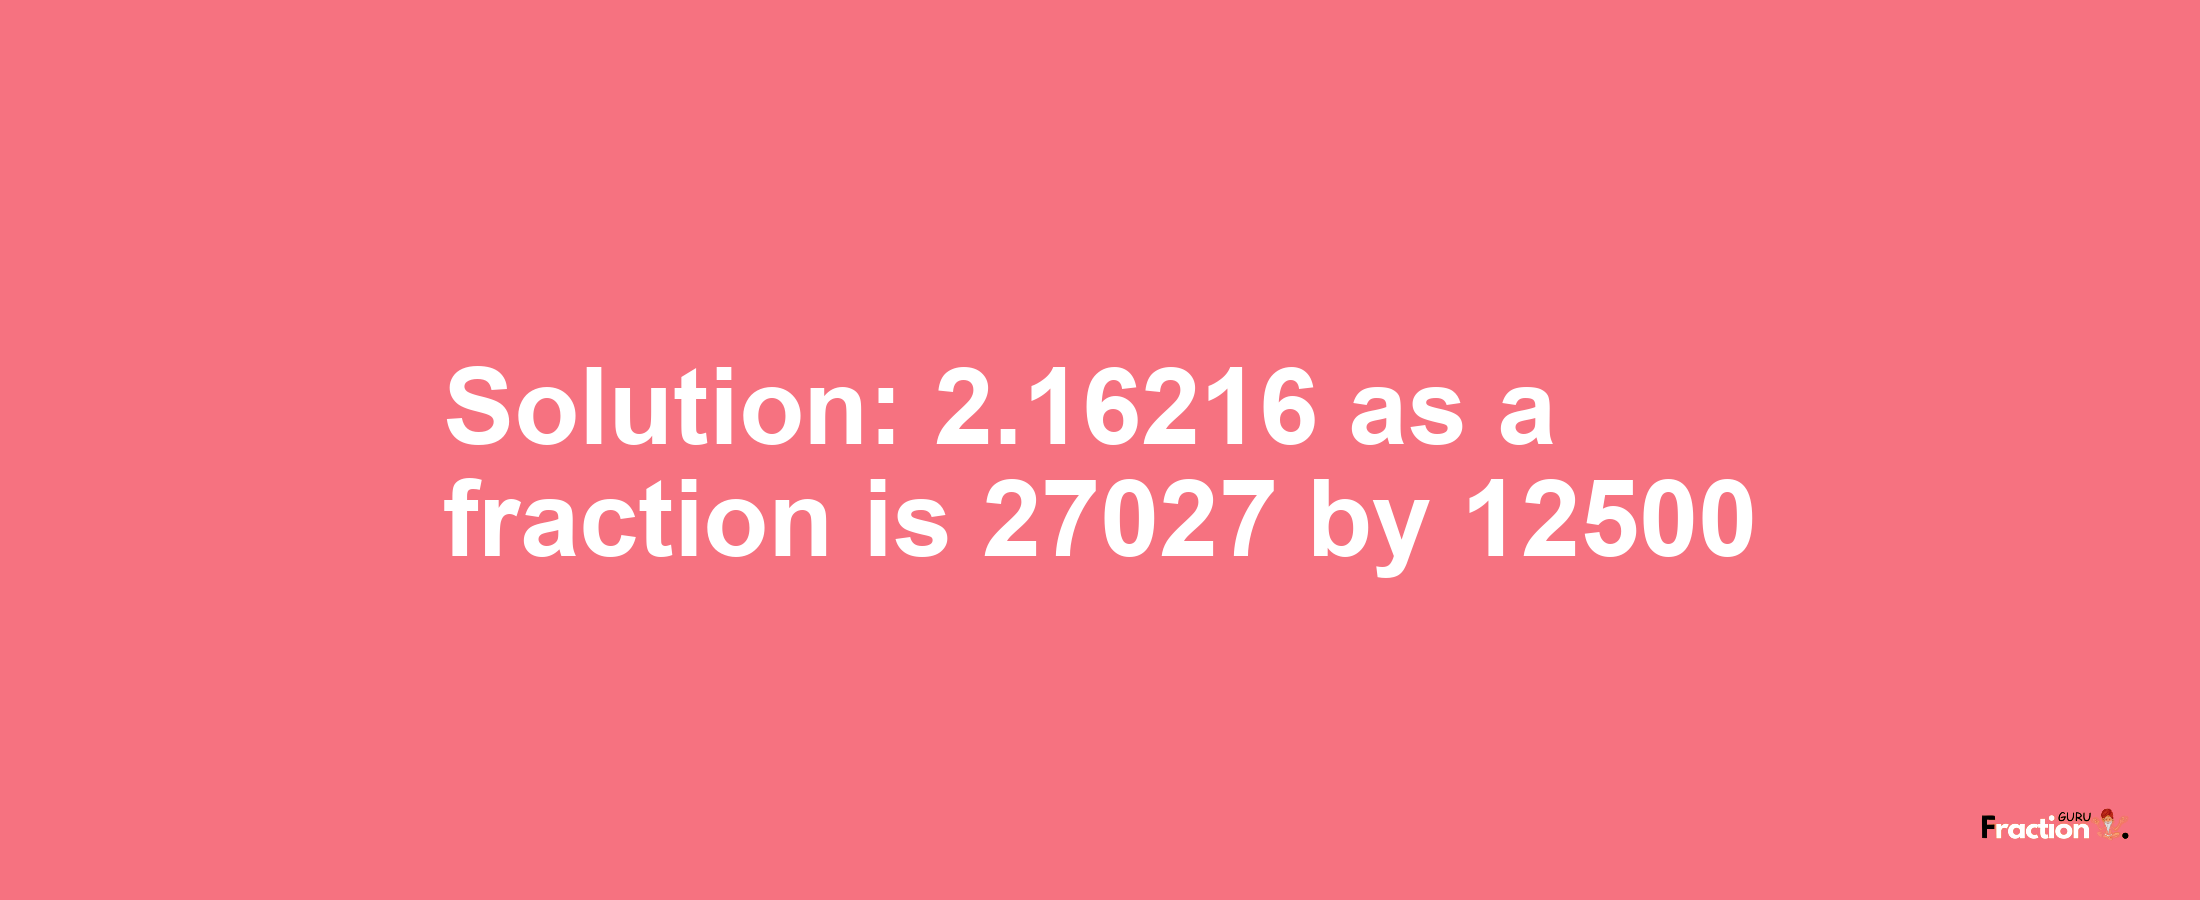 Solution:2.16216 as a fraction is 27027/12500